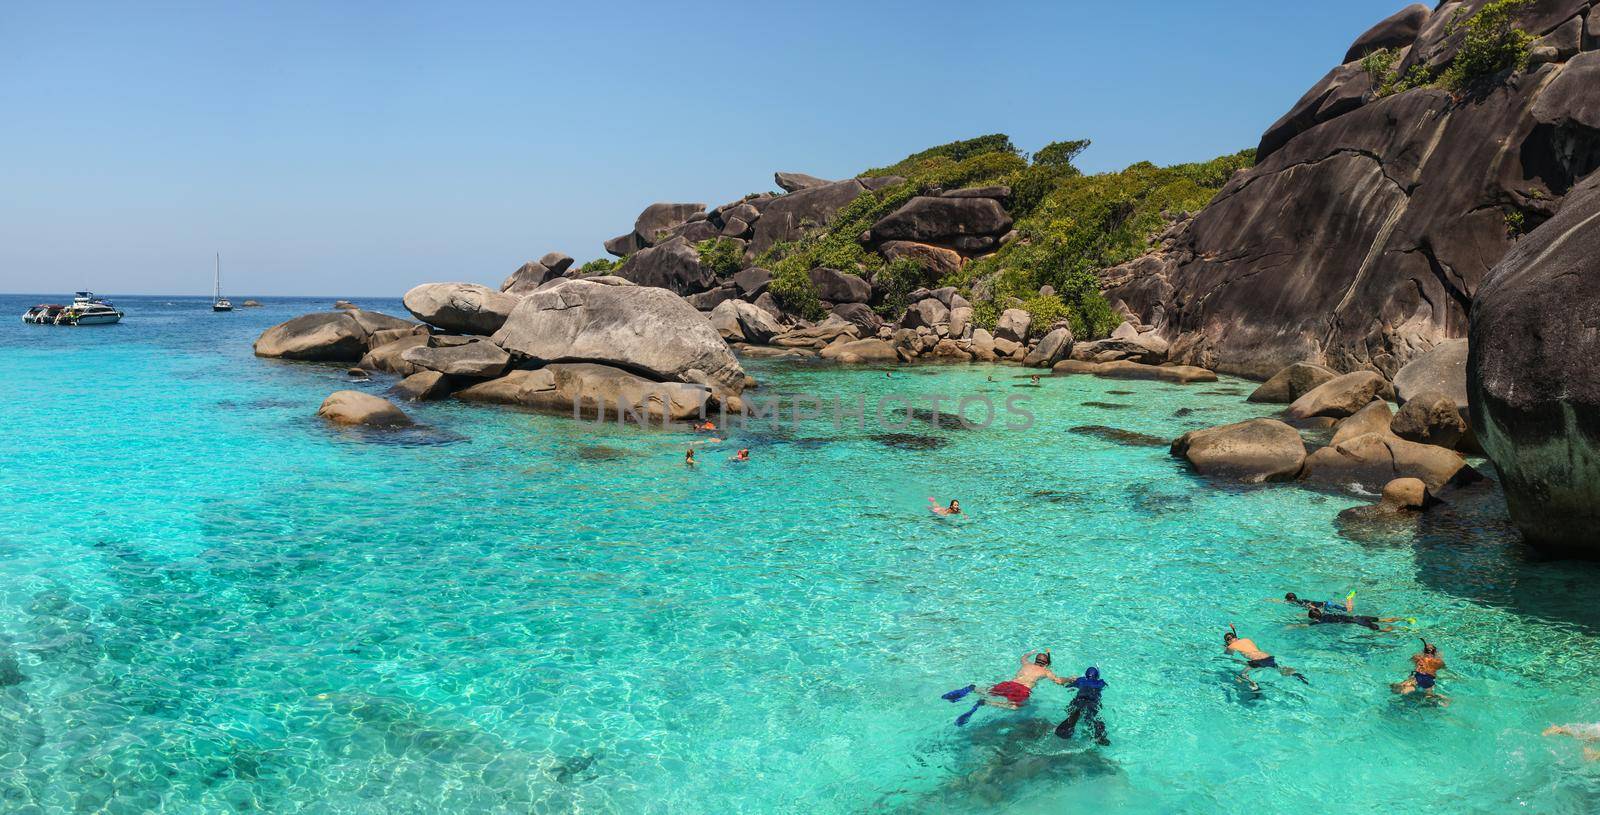 Similan Islands, Thailand - February 23, 2016:  Tourists snorkeling, swimming and enjoying crystal clear water in Similan Islands during guided tour on a sunny day.